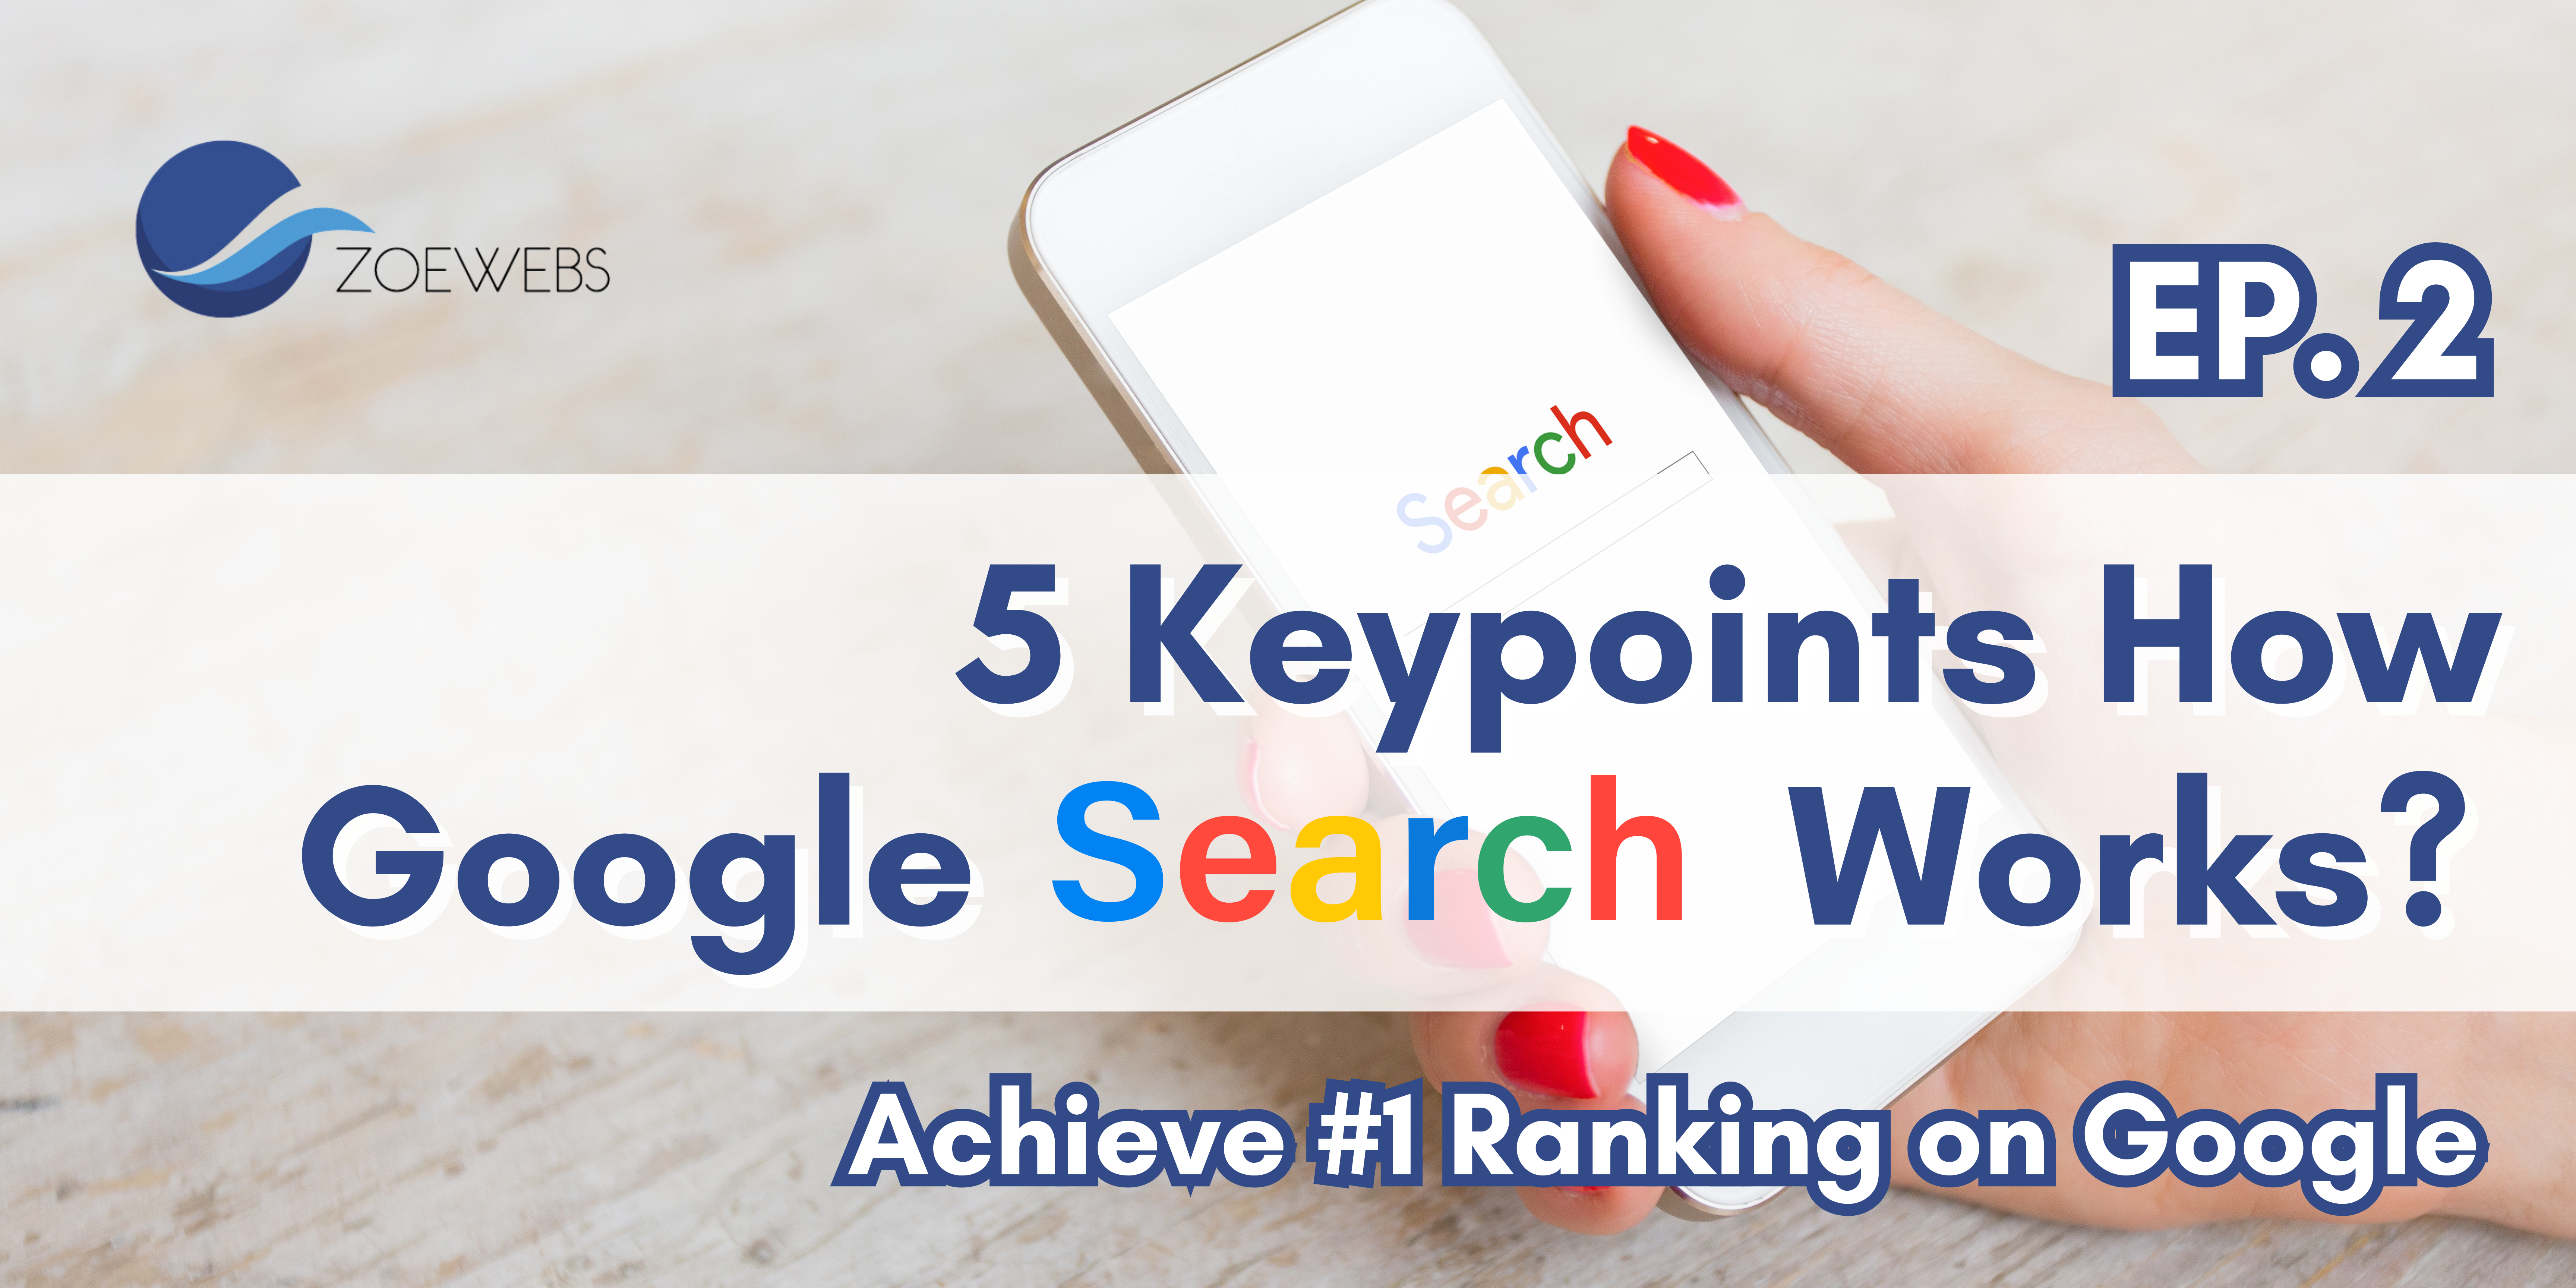 5 Keypoints How Google Search Works? | EP. 2: Achieve #1 Ranking on Google